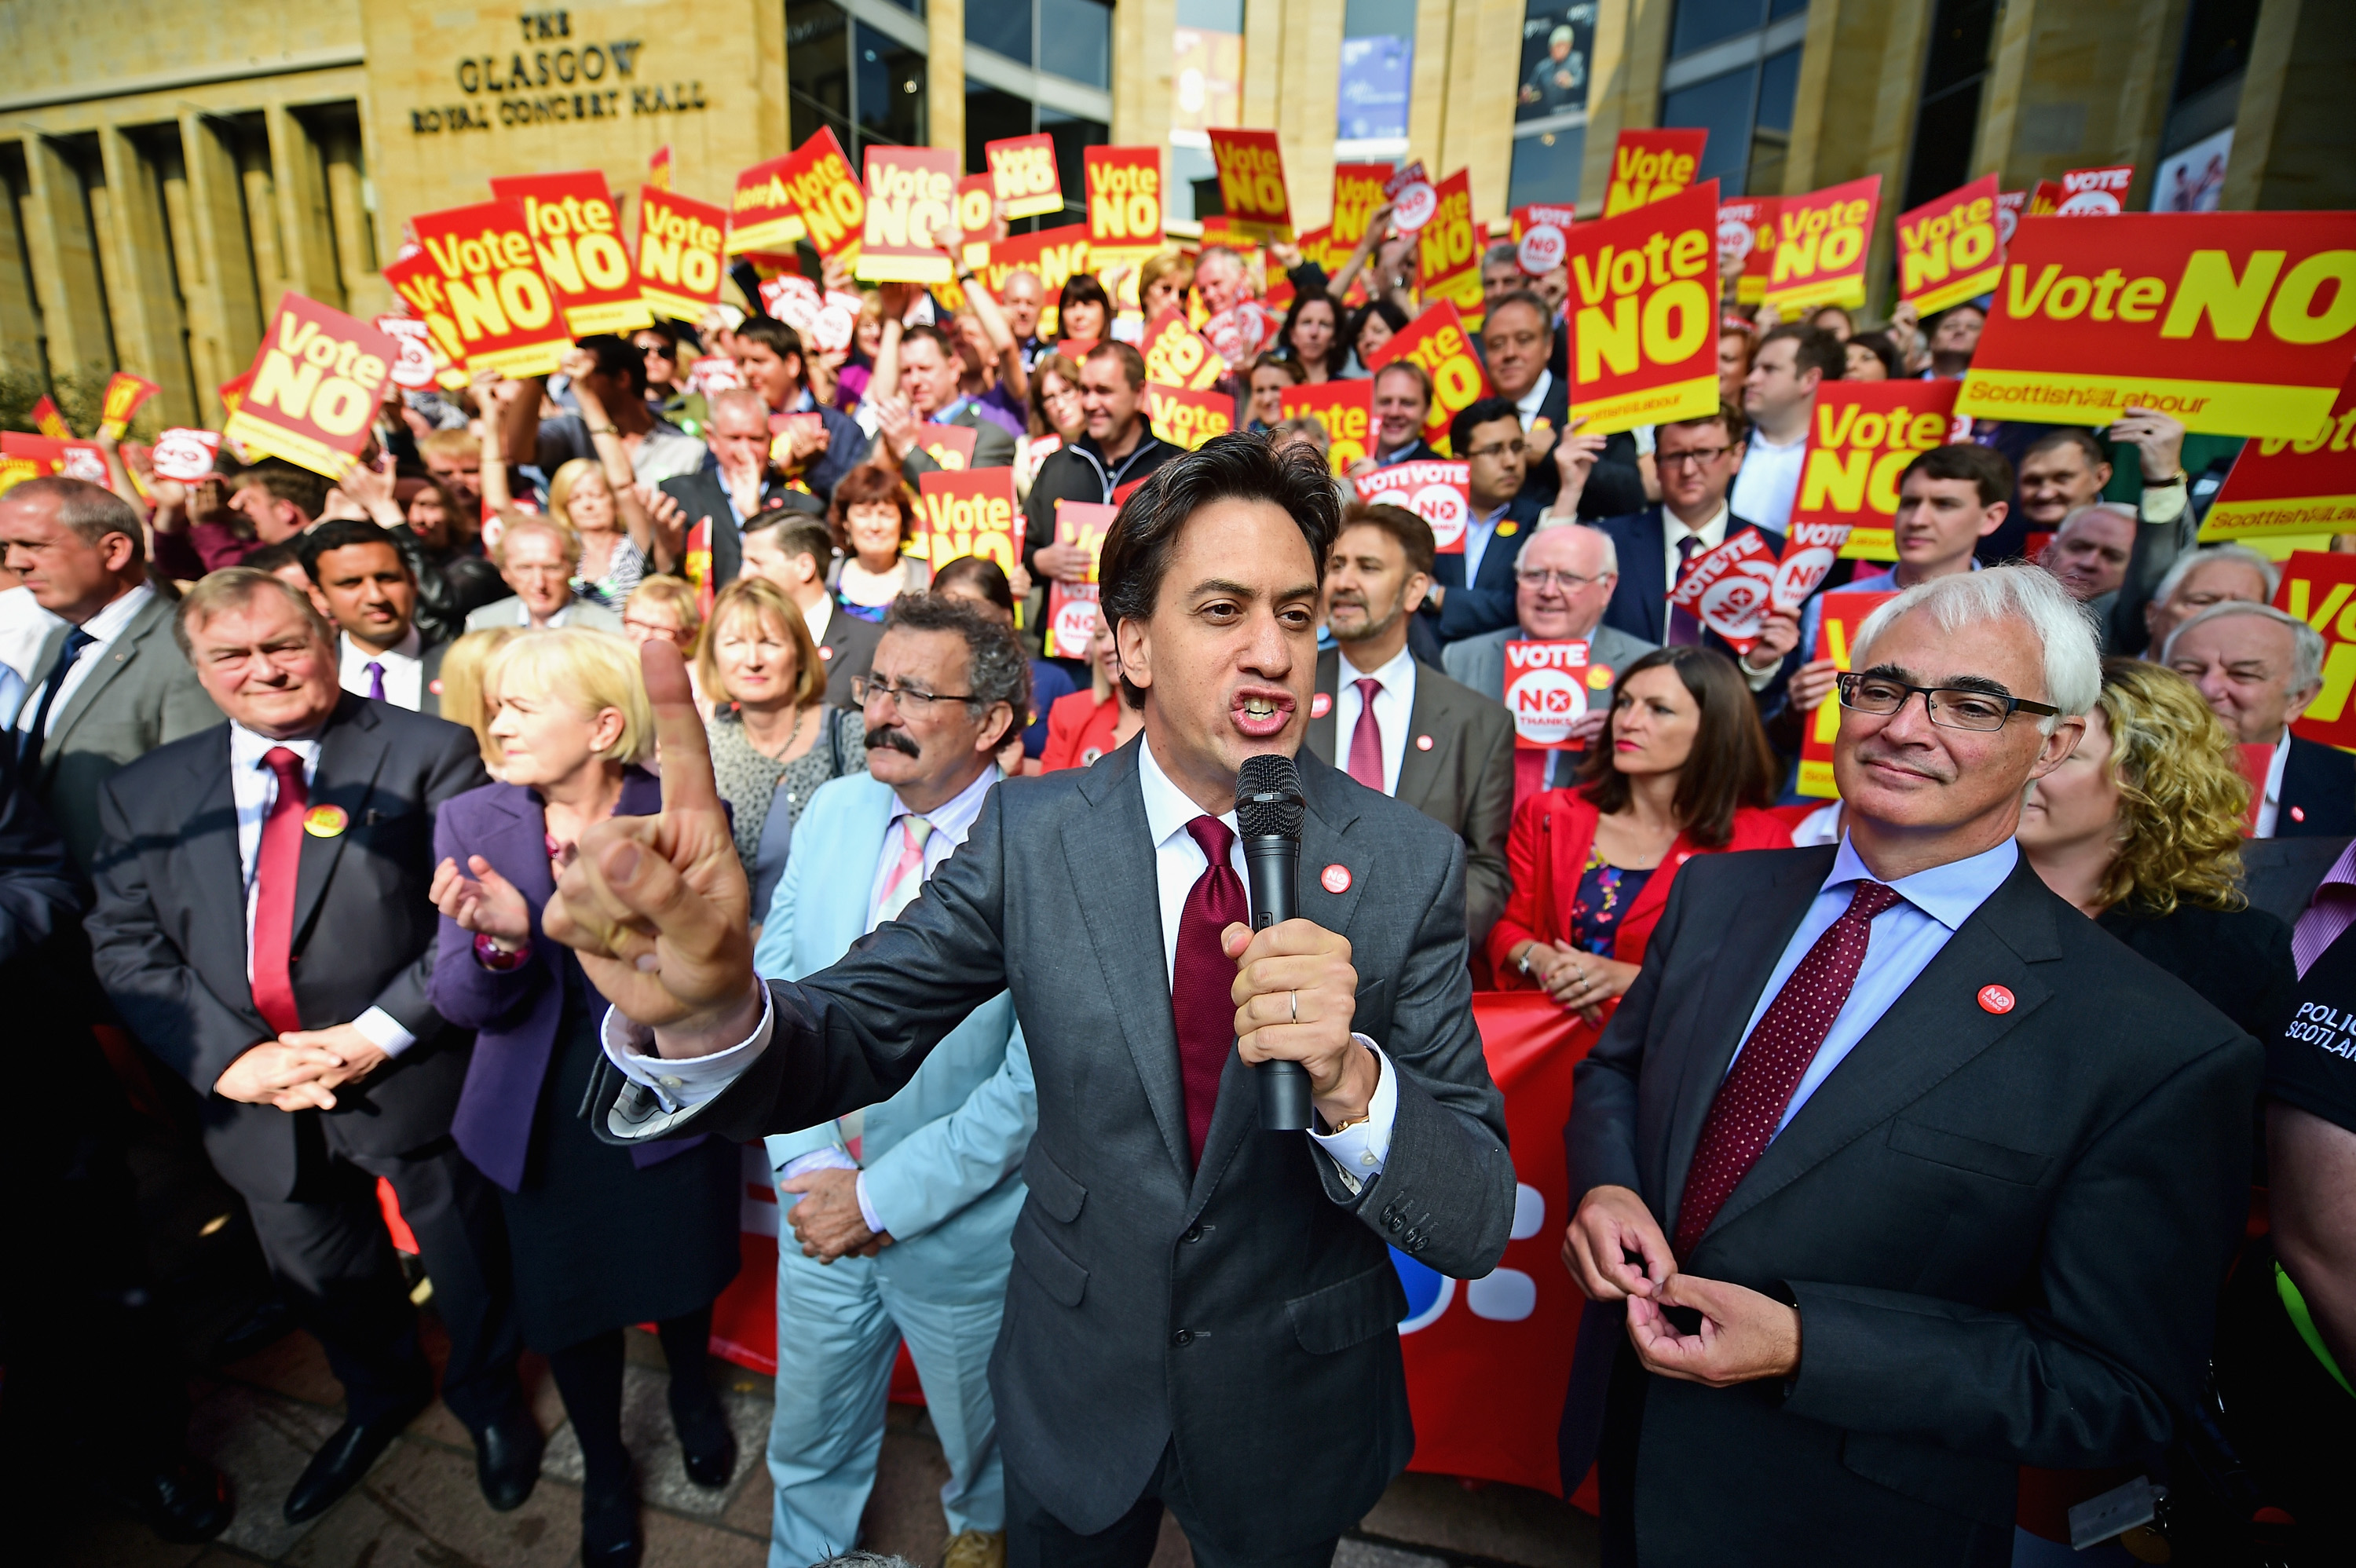 Chair of the Better Together Campaign Alistair Darling joins then-Labour leader Ed Miliband in Glasgow for a day's campaigning in support of the ''No'' vote in the Scottish Referendum on September 11, 2014.